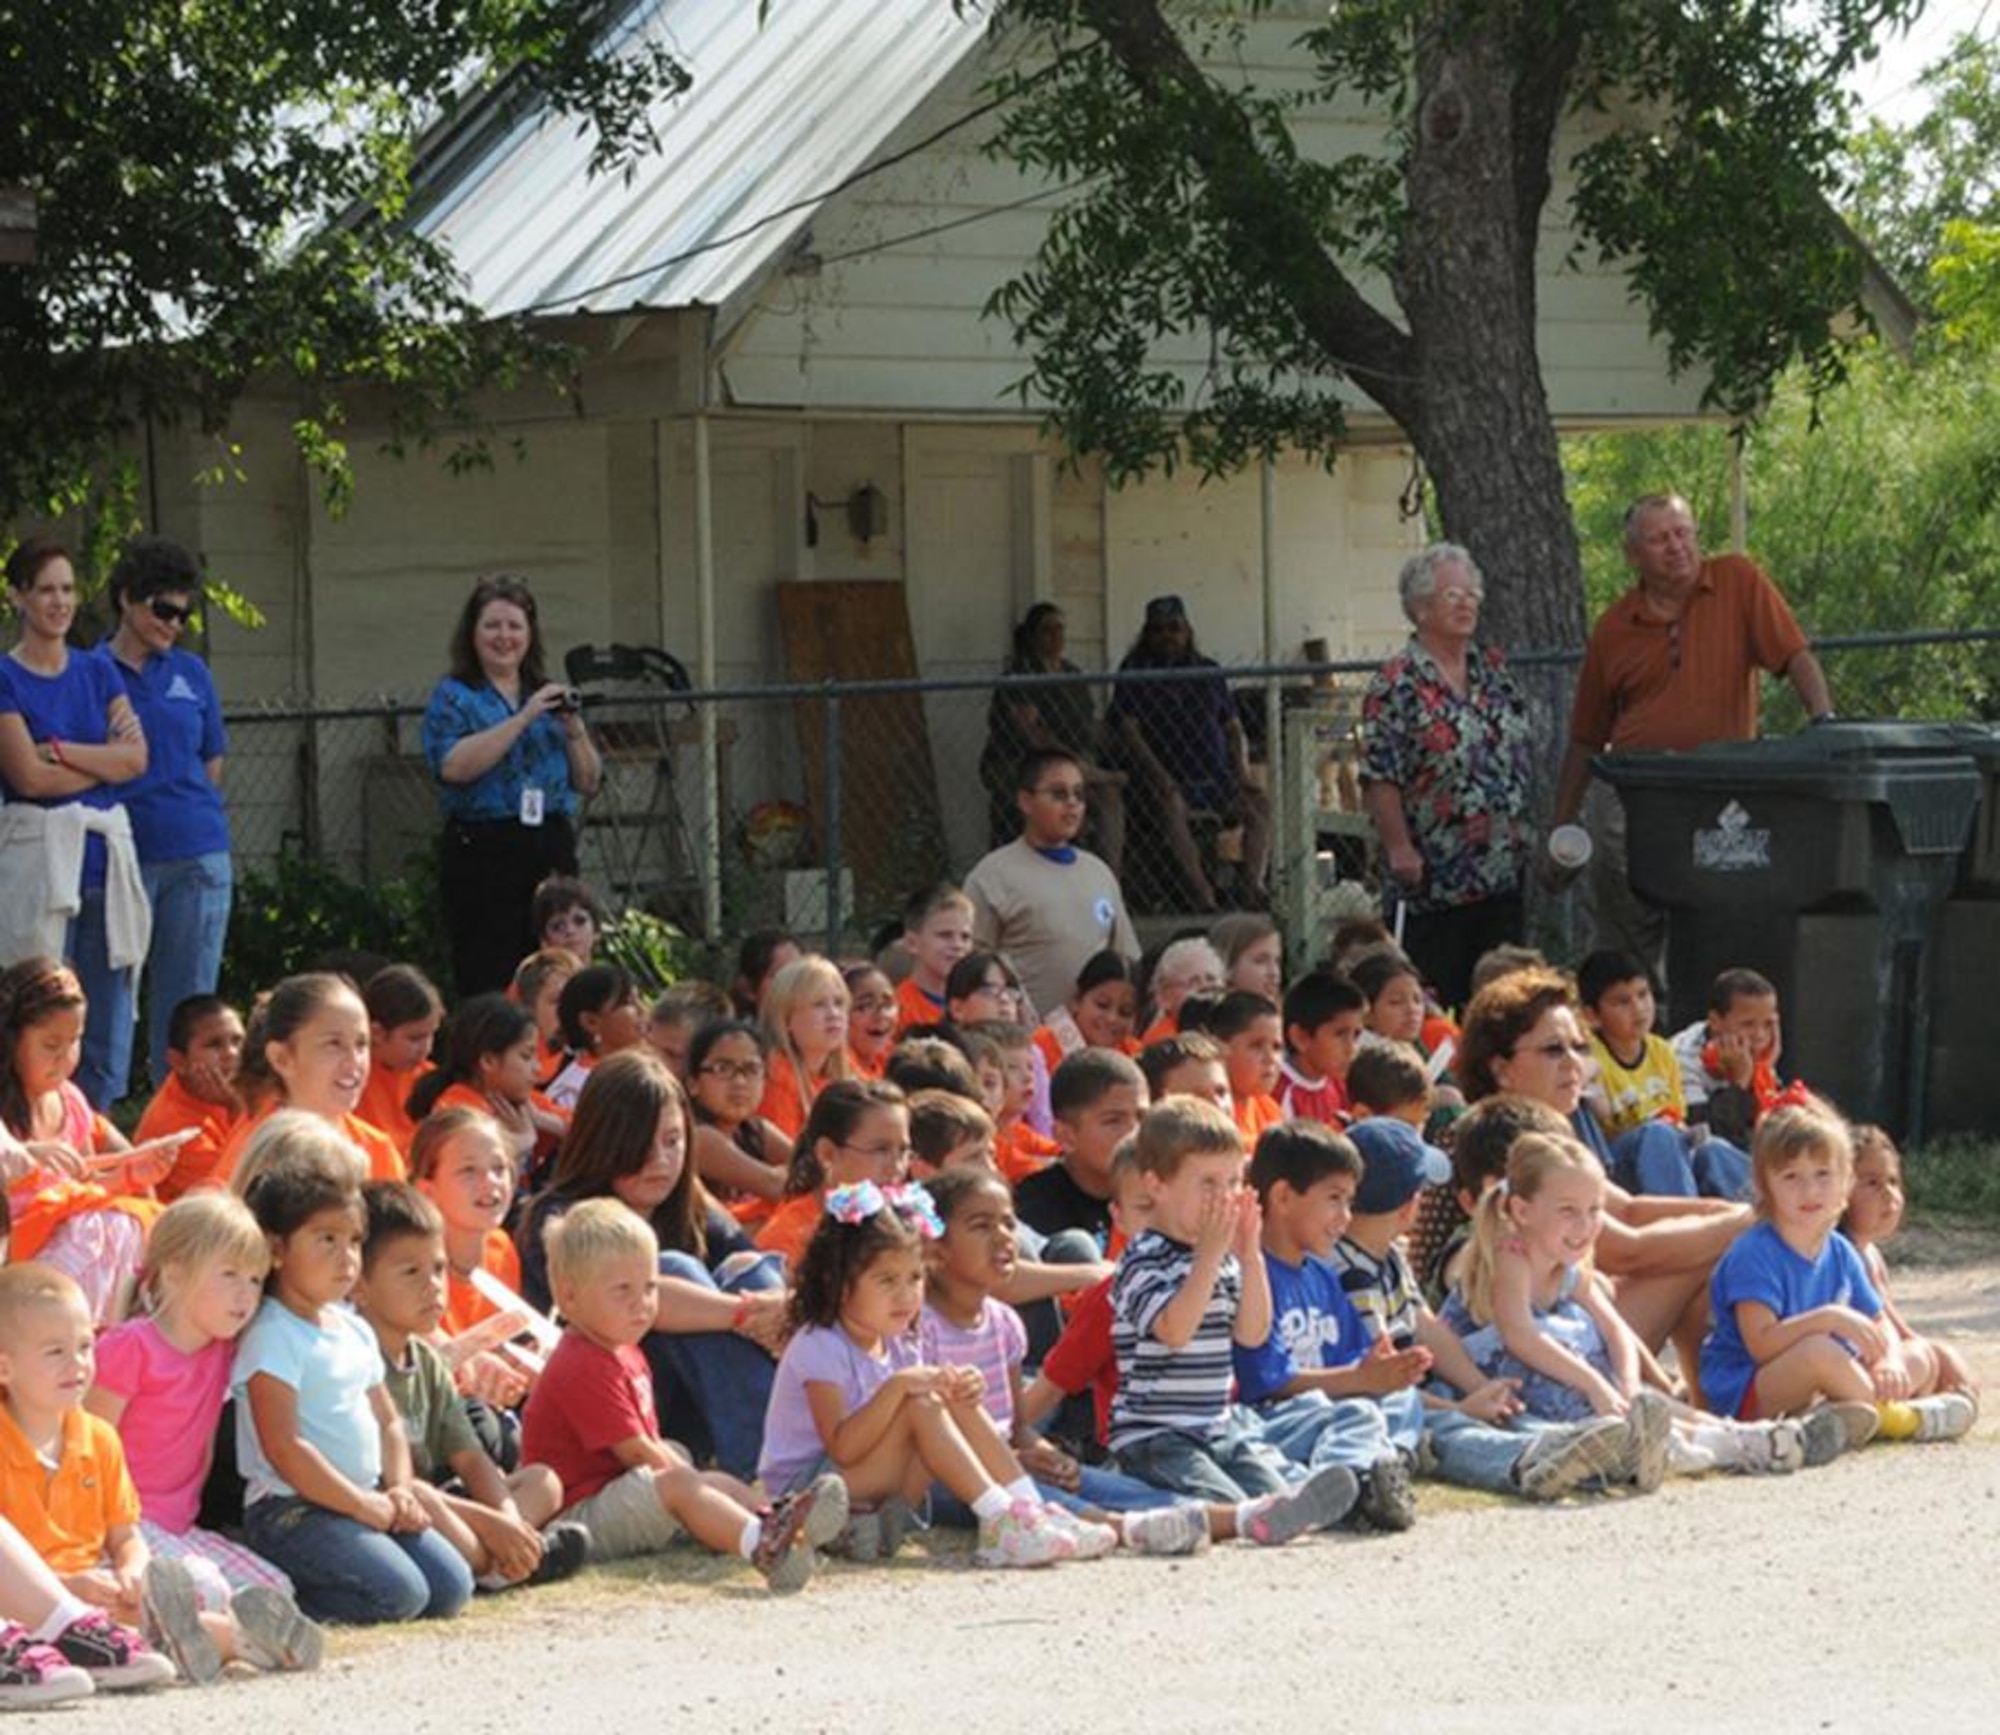 Residents of Eden, Texas watch as a suspected drug house is demolished.